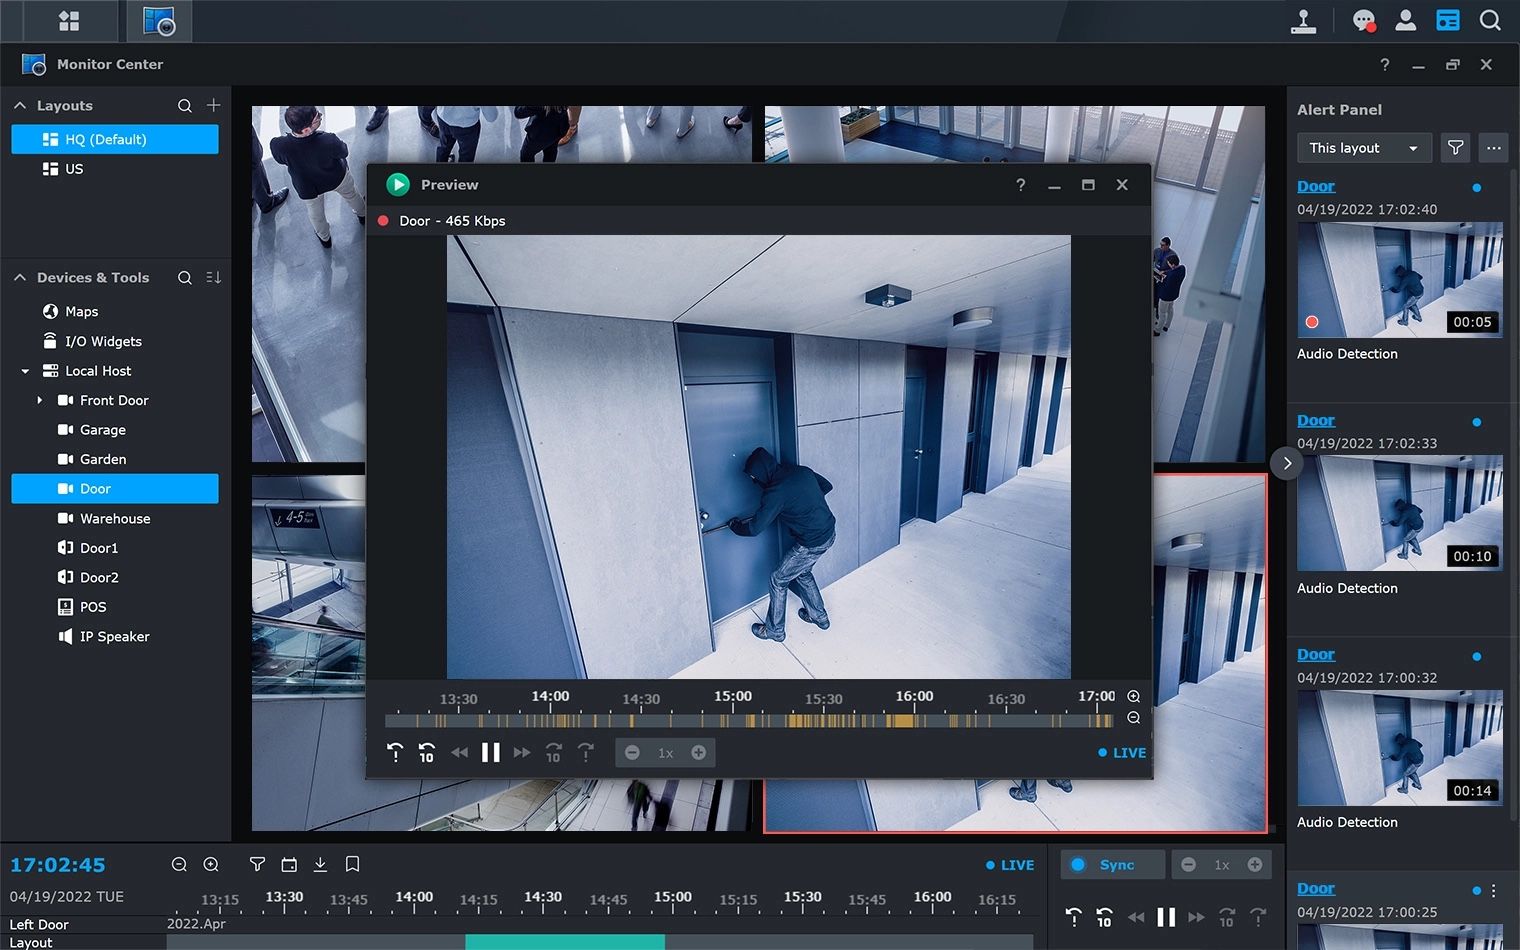 Screenshot of the Synology Surveillance Station software showing the camera feeds